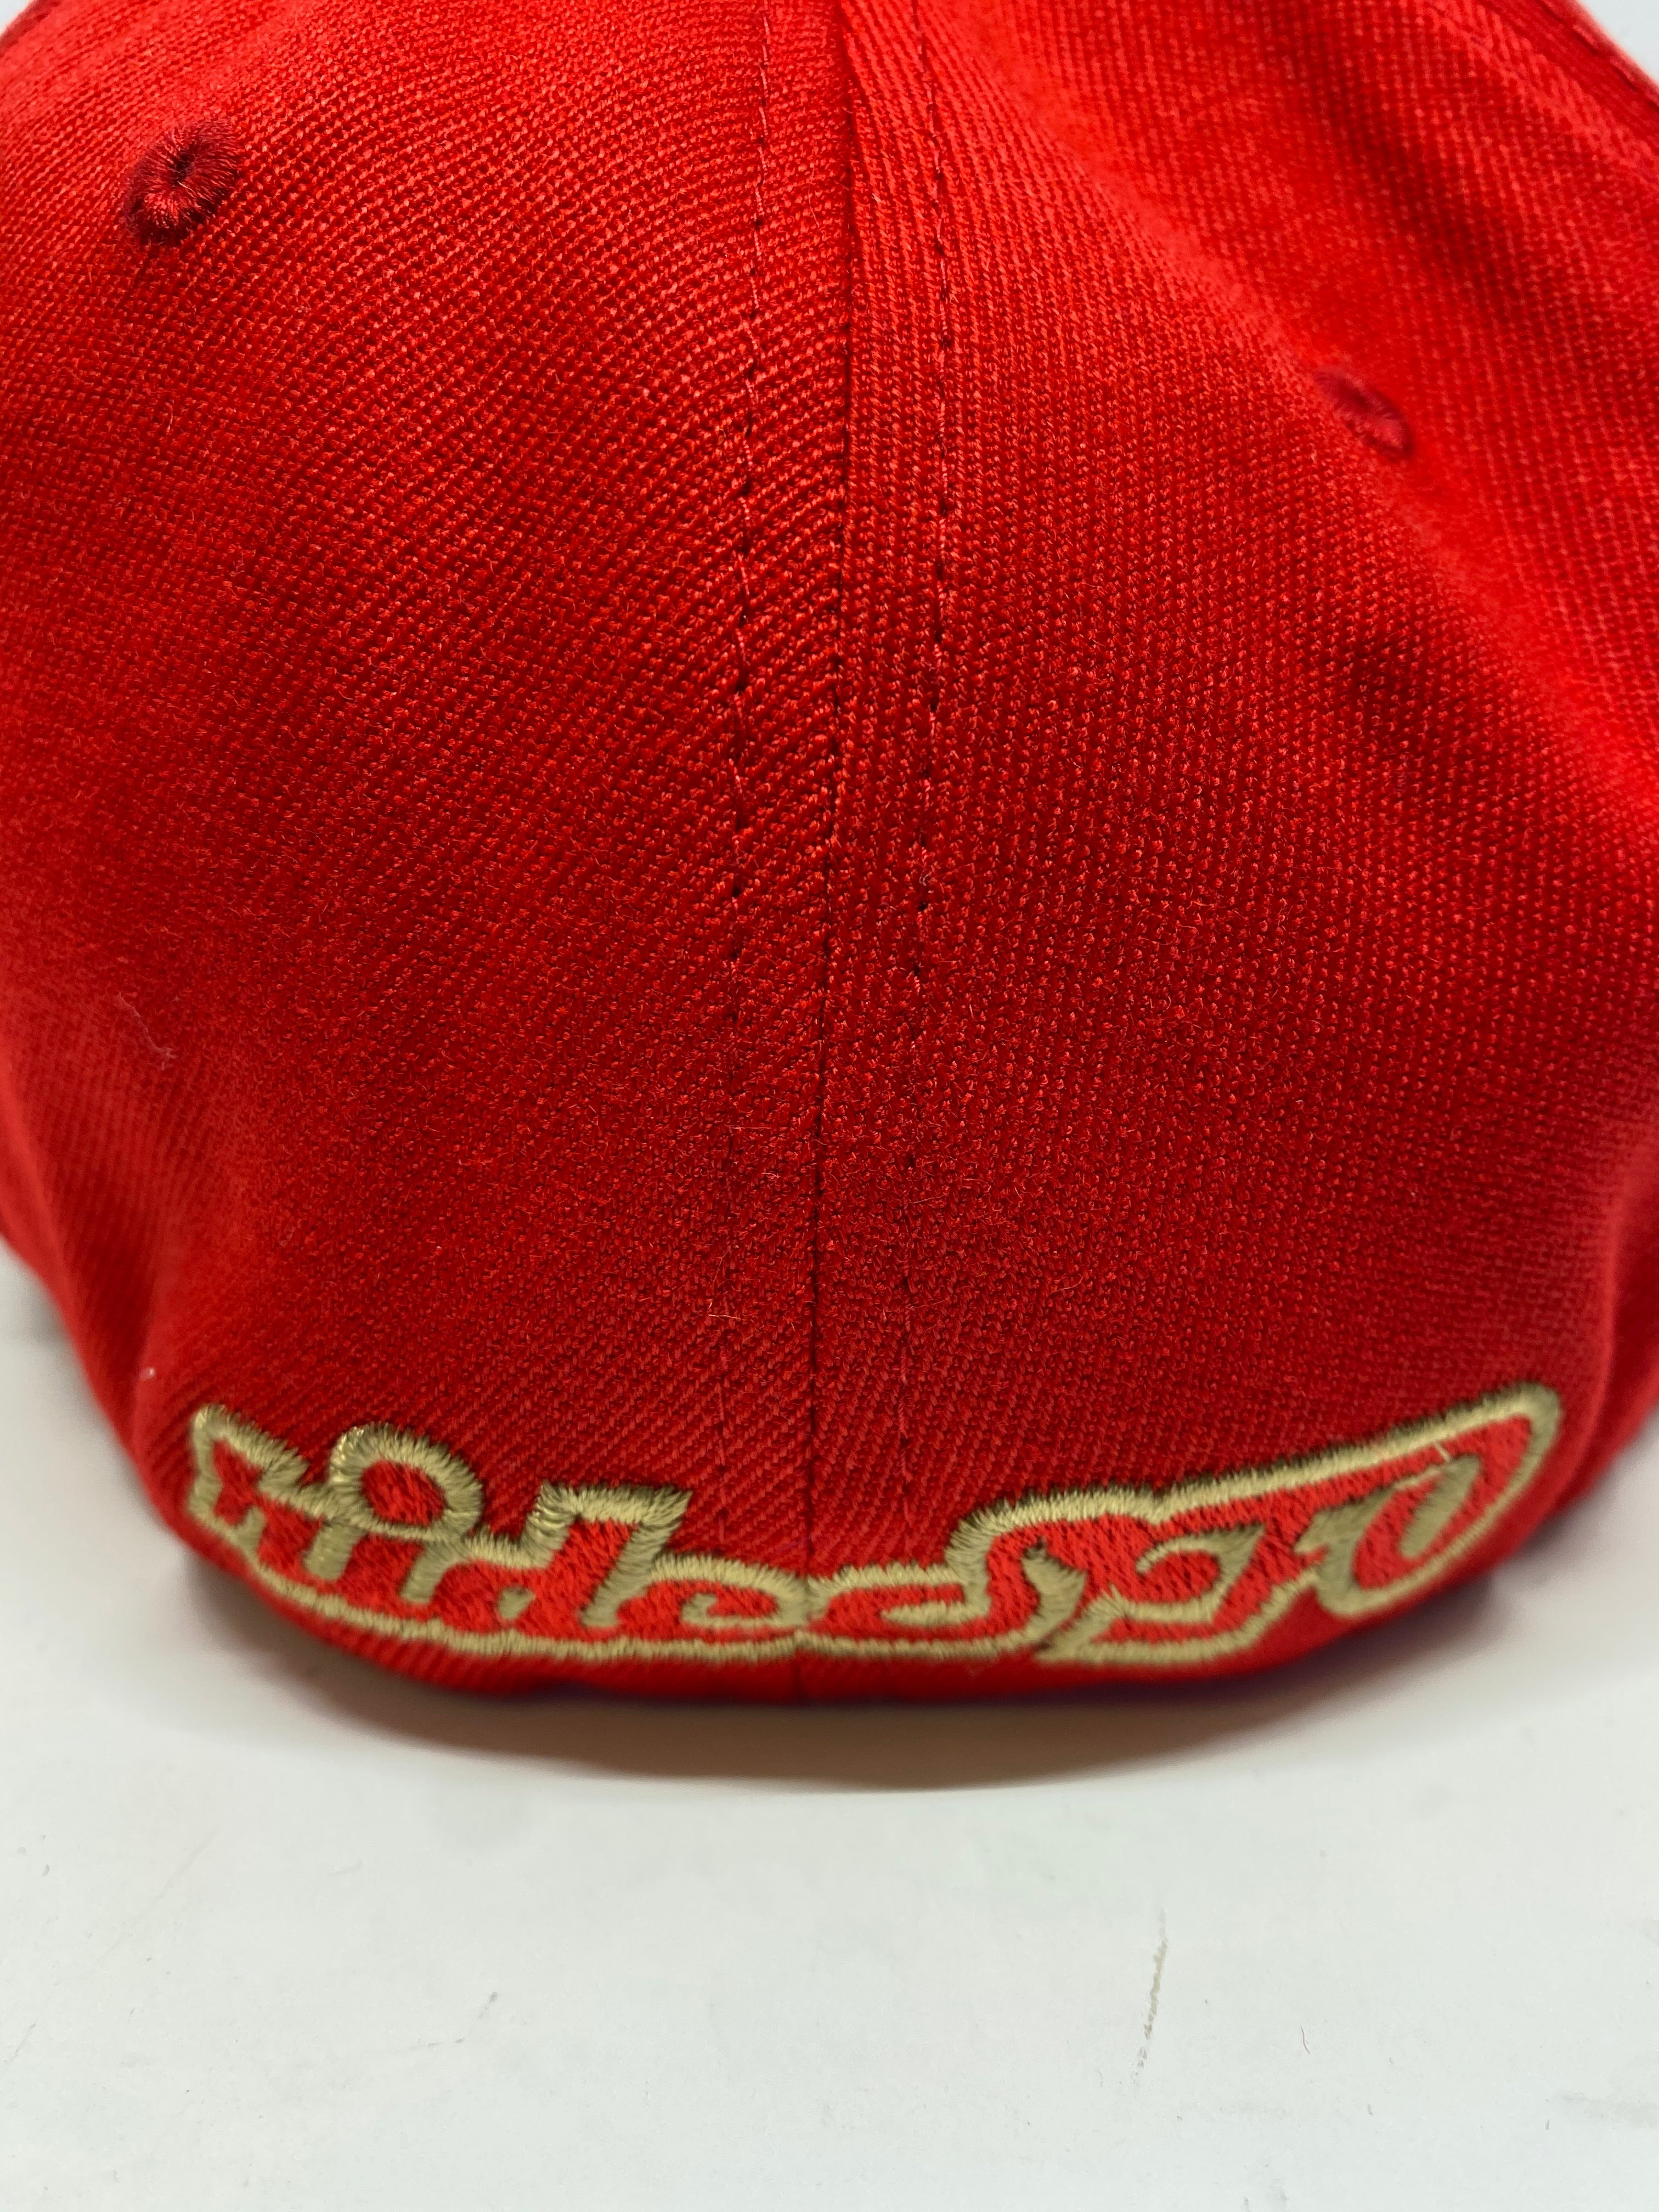 rideSFO LoungeChairLife Classic Hat Red/Gold